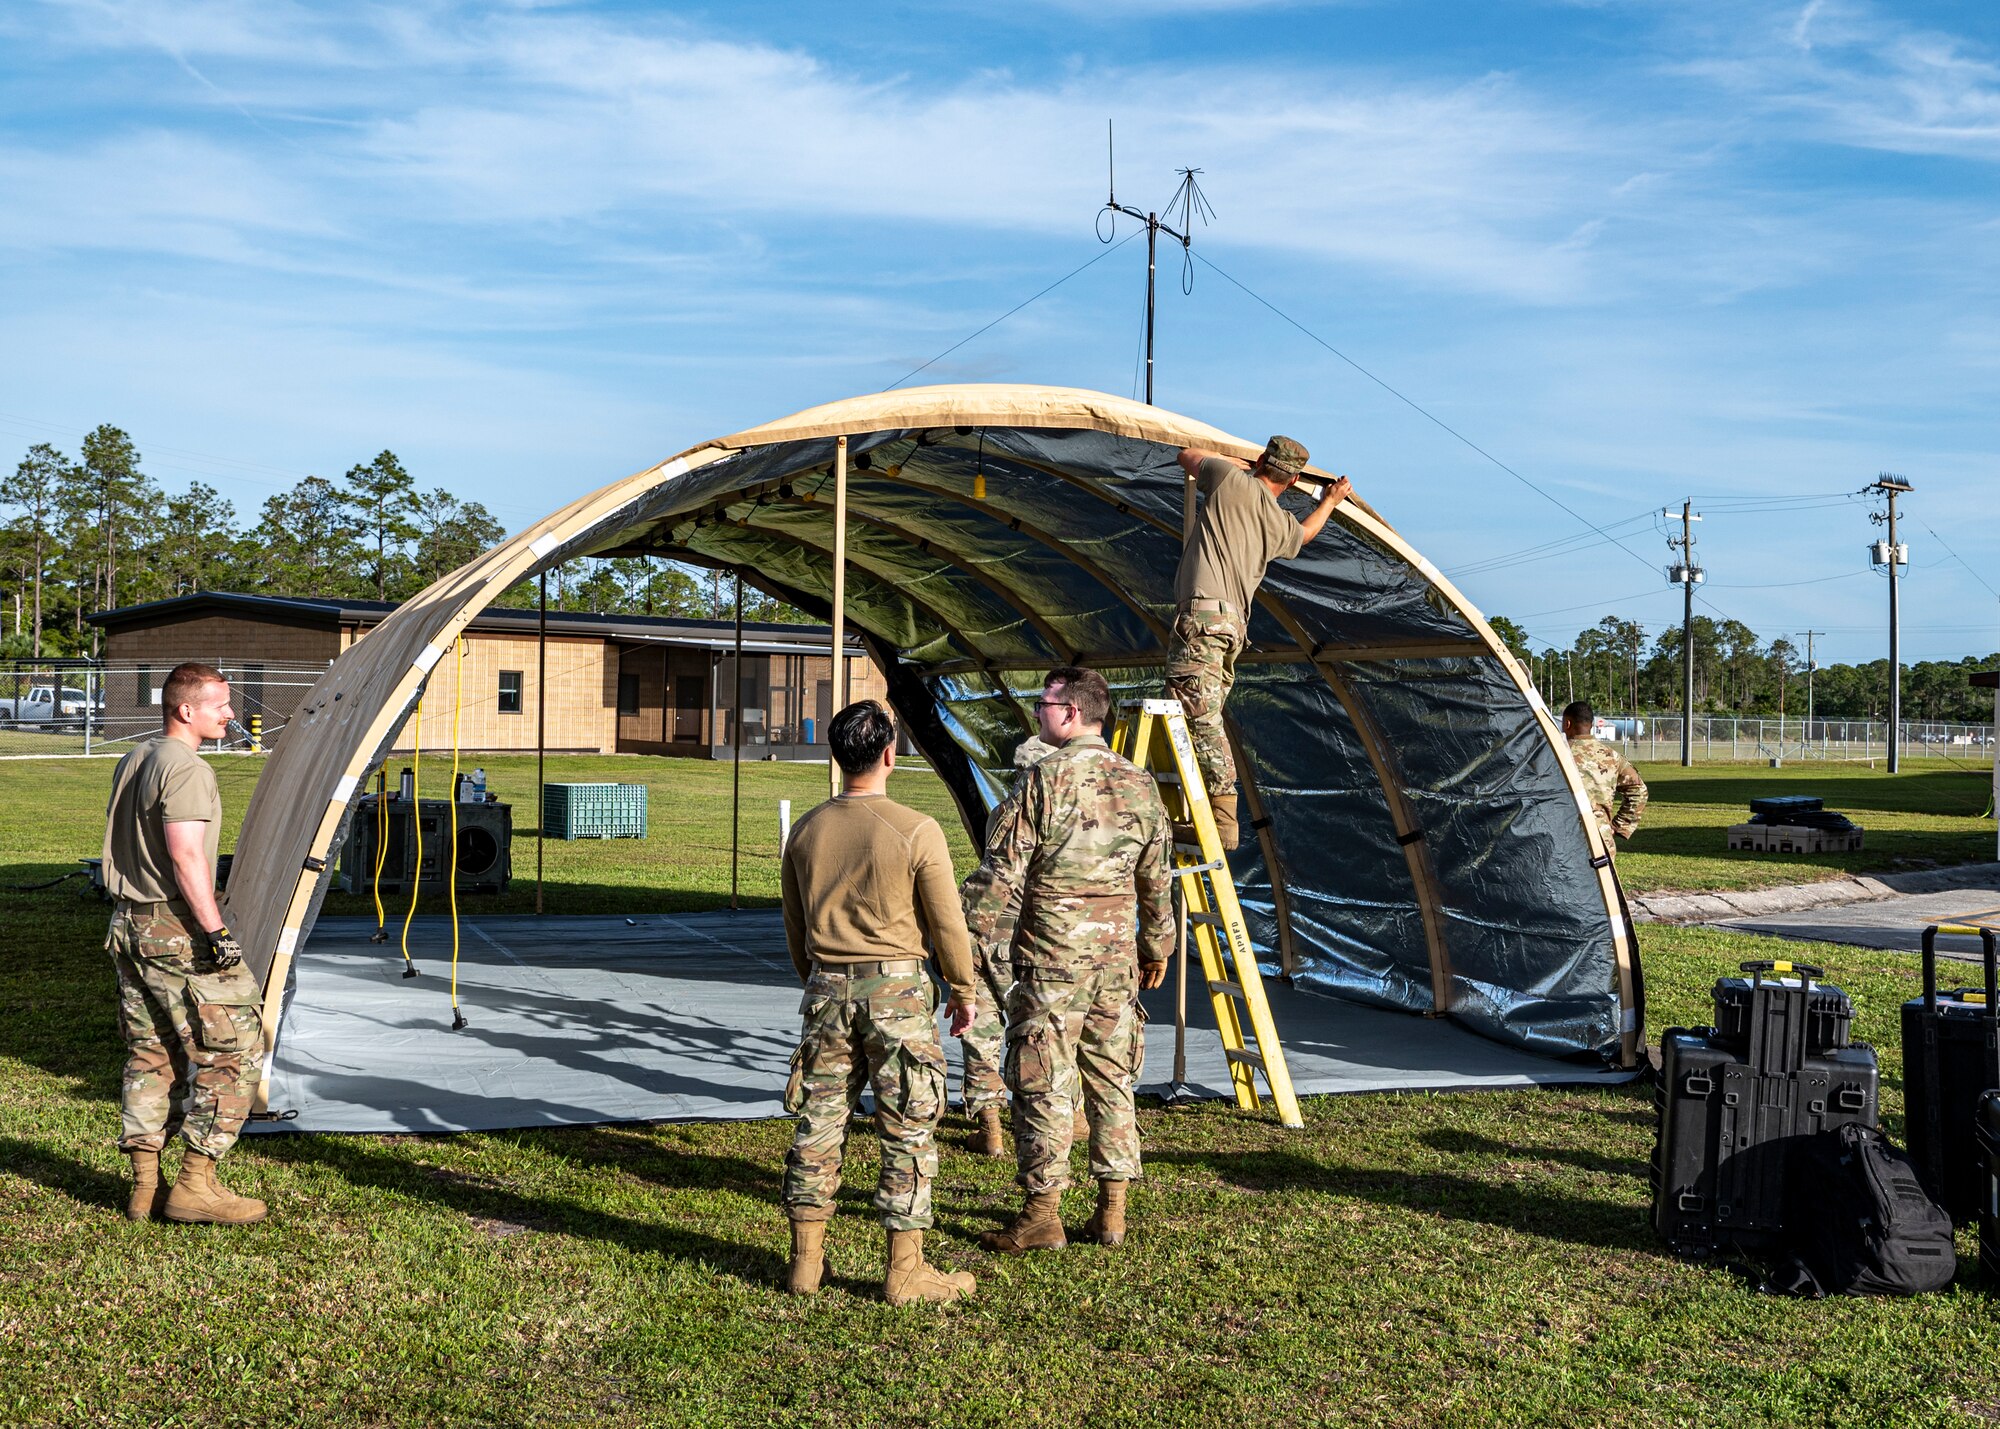 U.S. Air Force Airmen assigned to the 23rd Logistics Readiness Squadron build a tent at Avon Park Air Force Range, Florida, April 9, 2024. Airmen from various Air Force specialties built the tents to allow communications, medical, and maintenance to operate at the forward operating site as part of exercise Ready Tiger 24-1. (U.S. Air Force photo by Airman 1st Class Leonid Soubbotine)